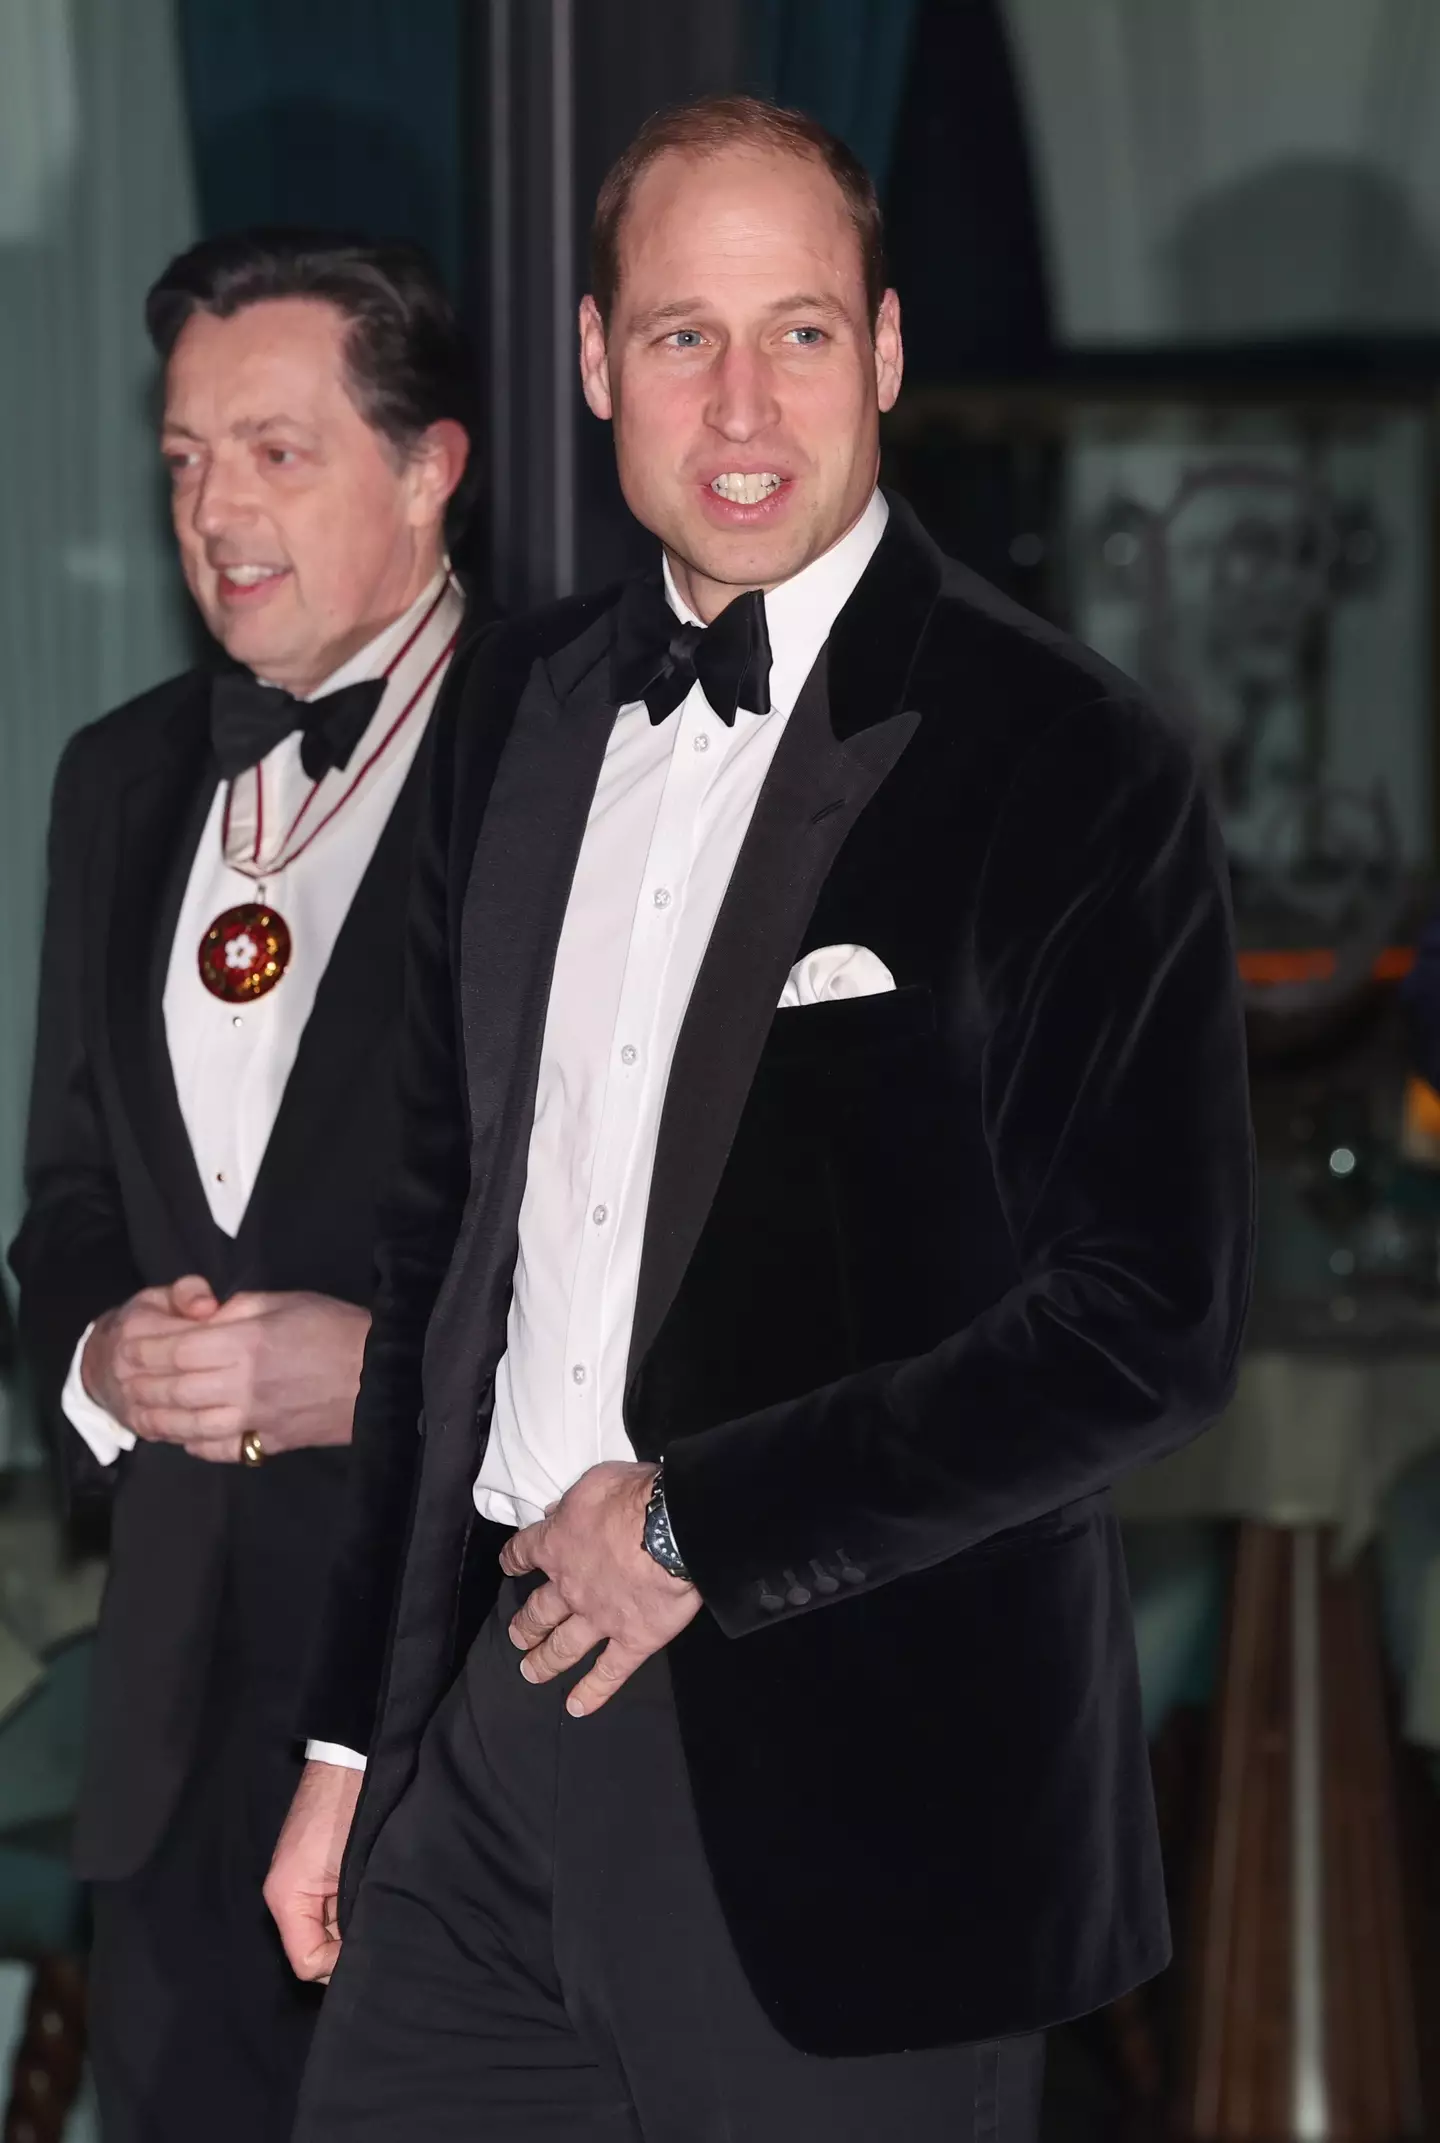 This is the first time Prince William has addressed his father's diagnosis.